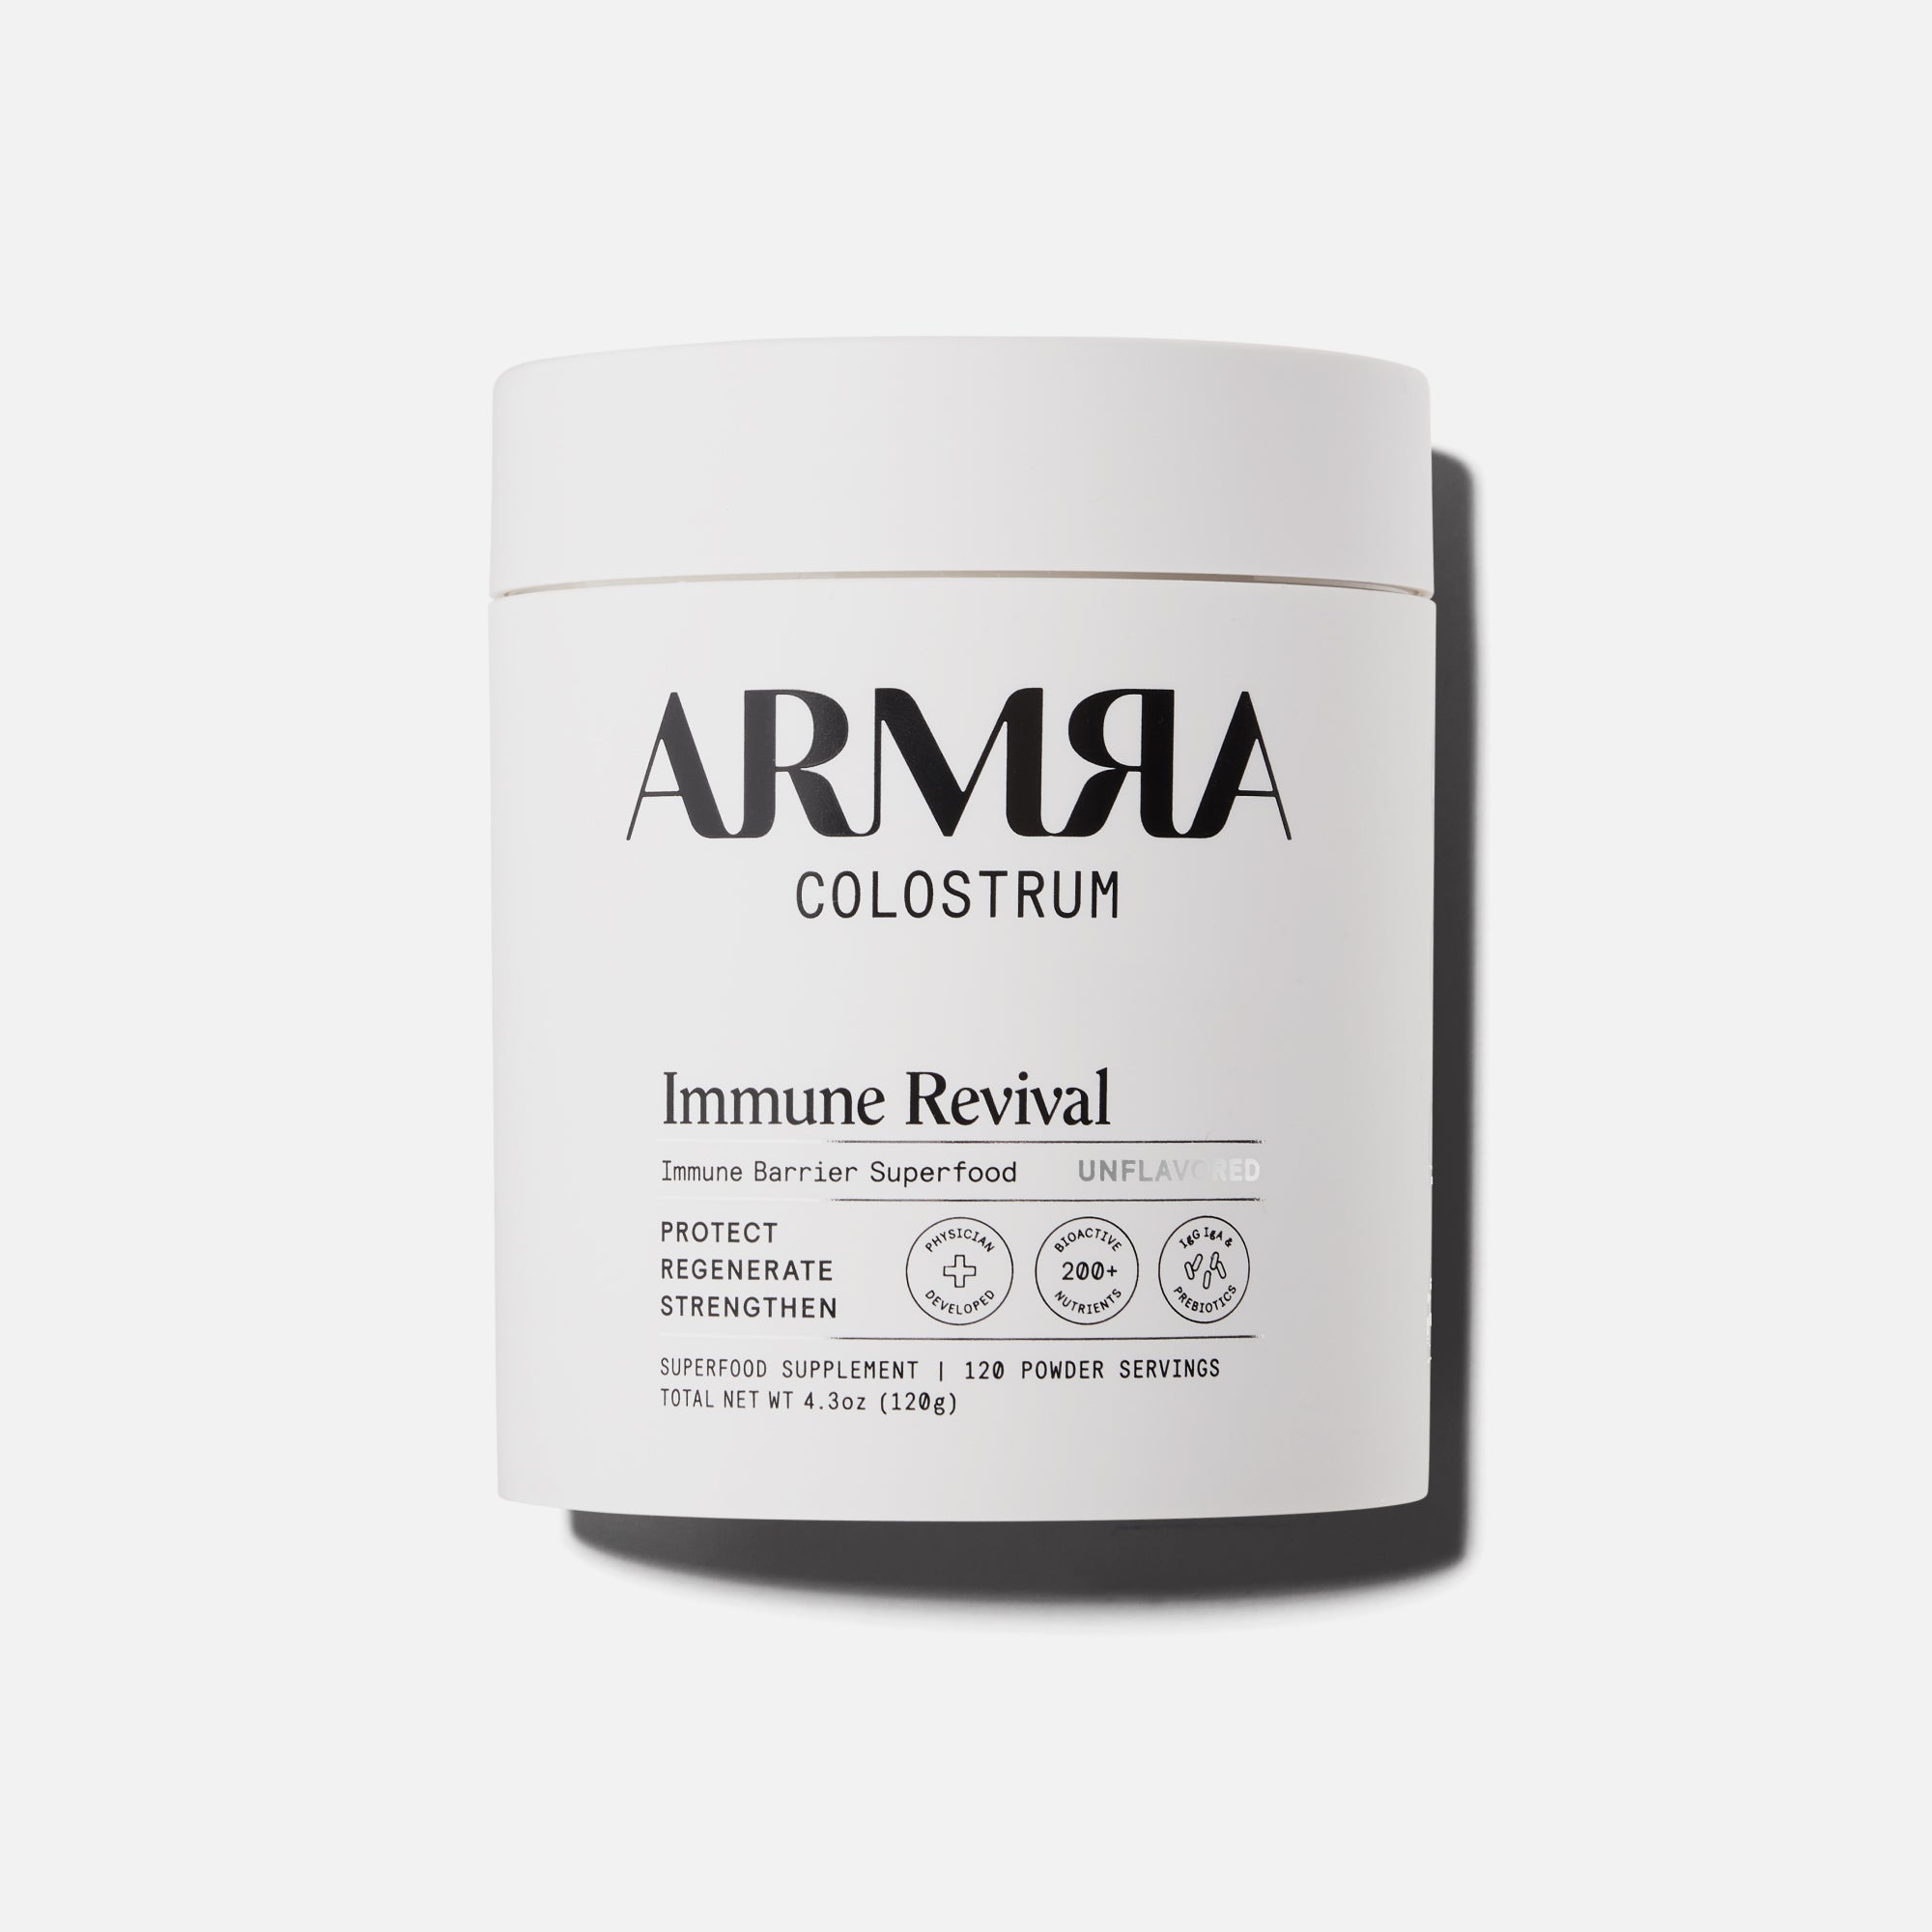 White Jar of ARMRA Colostrum Unflavored on a White Background